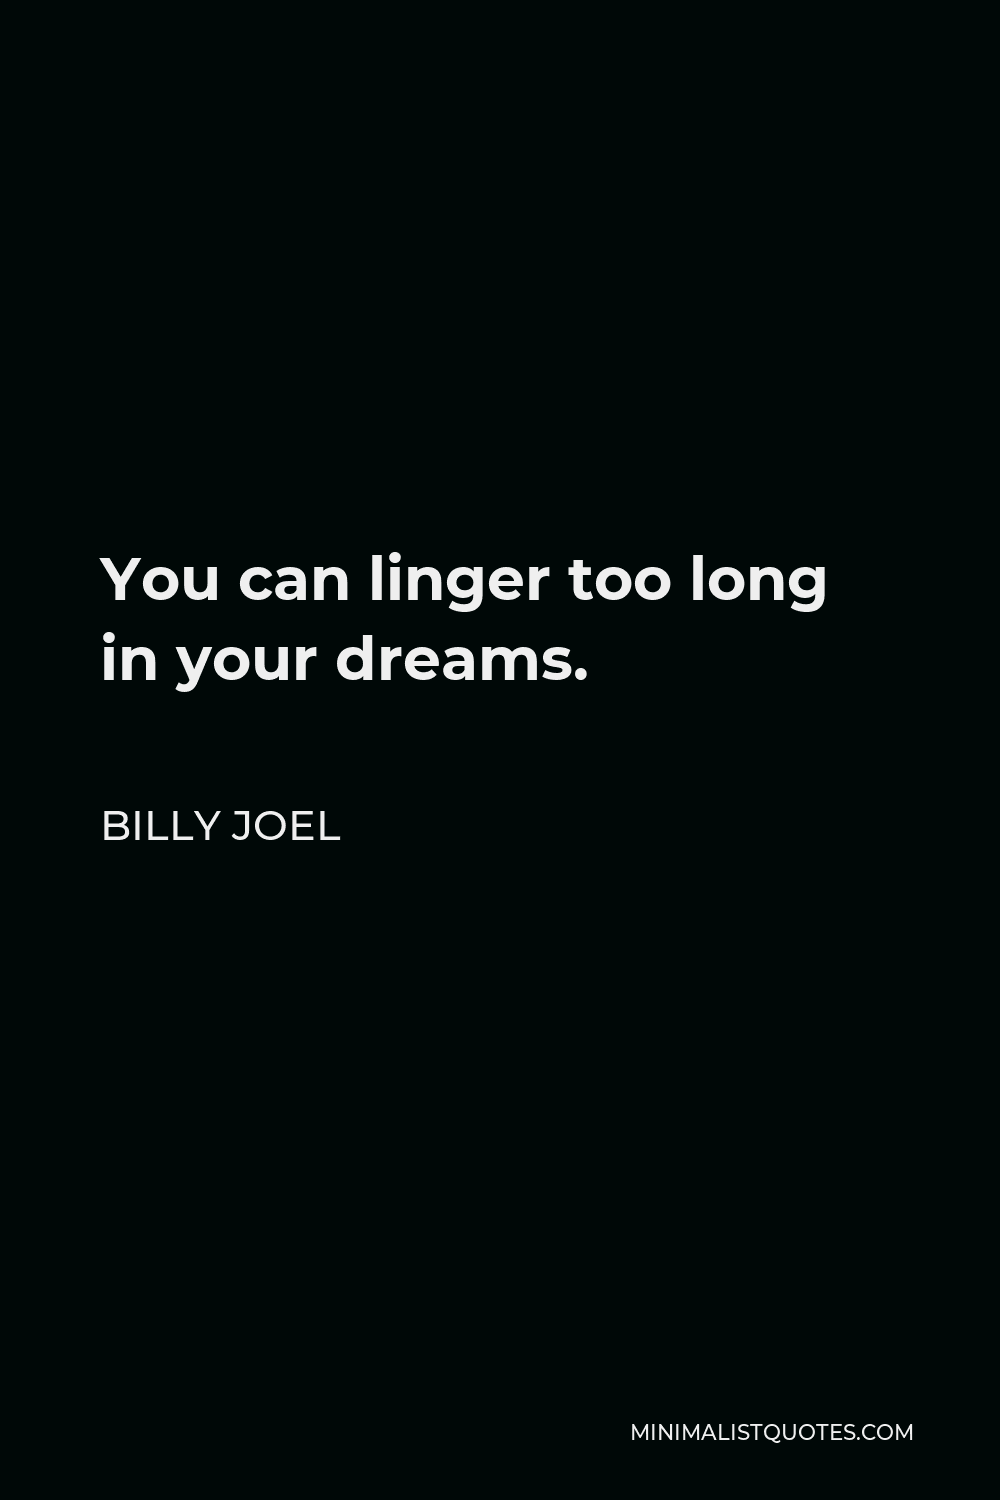 Billy Joel Quote - You can linger too long in your dreams.